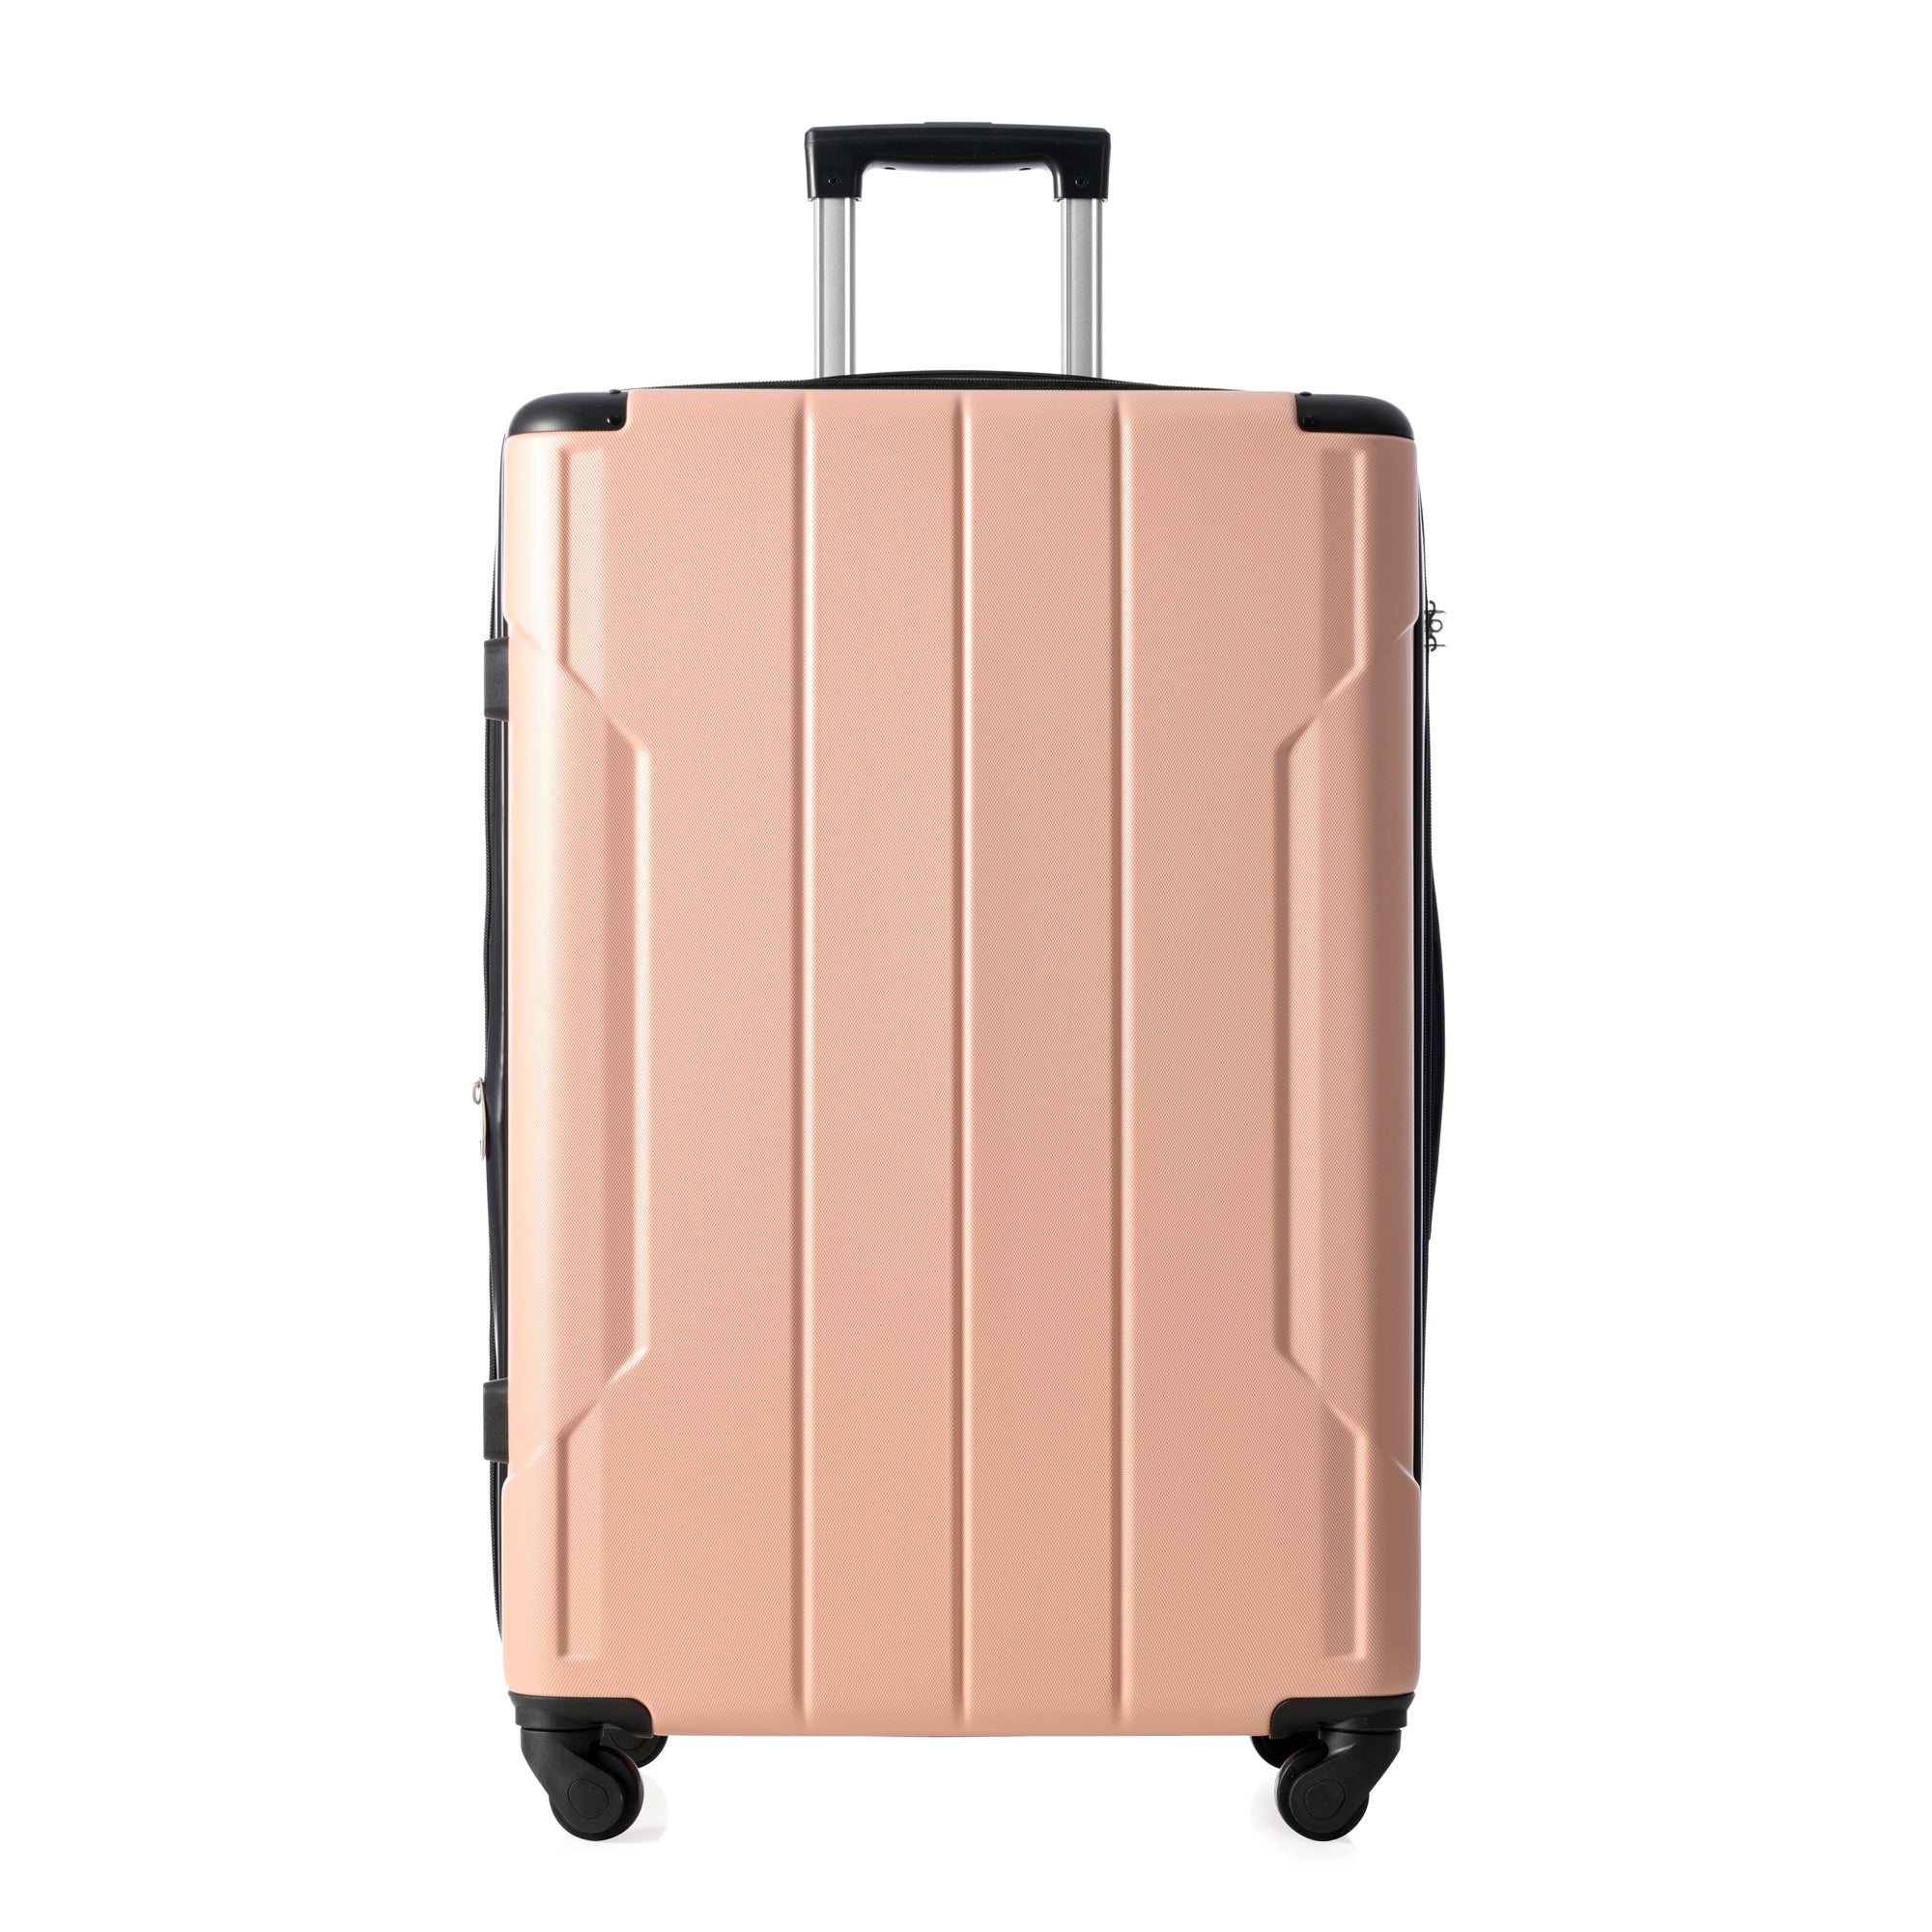 Hardshell Luggage Spinner Suitcase with TSA Lock pink-abs